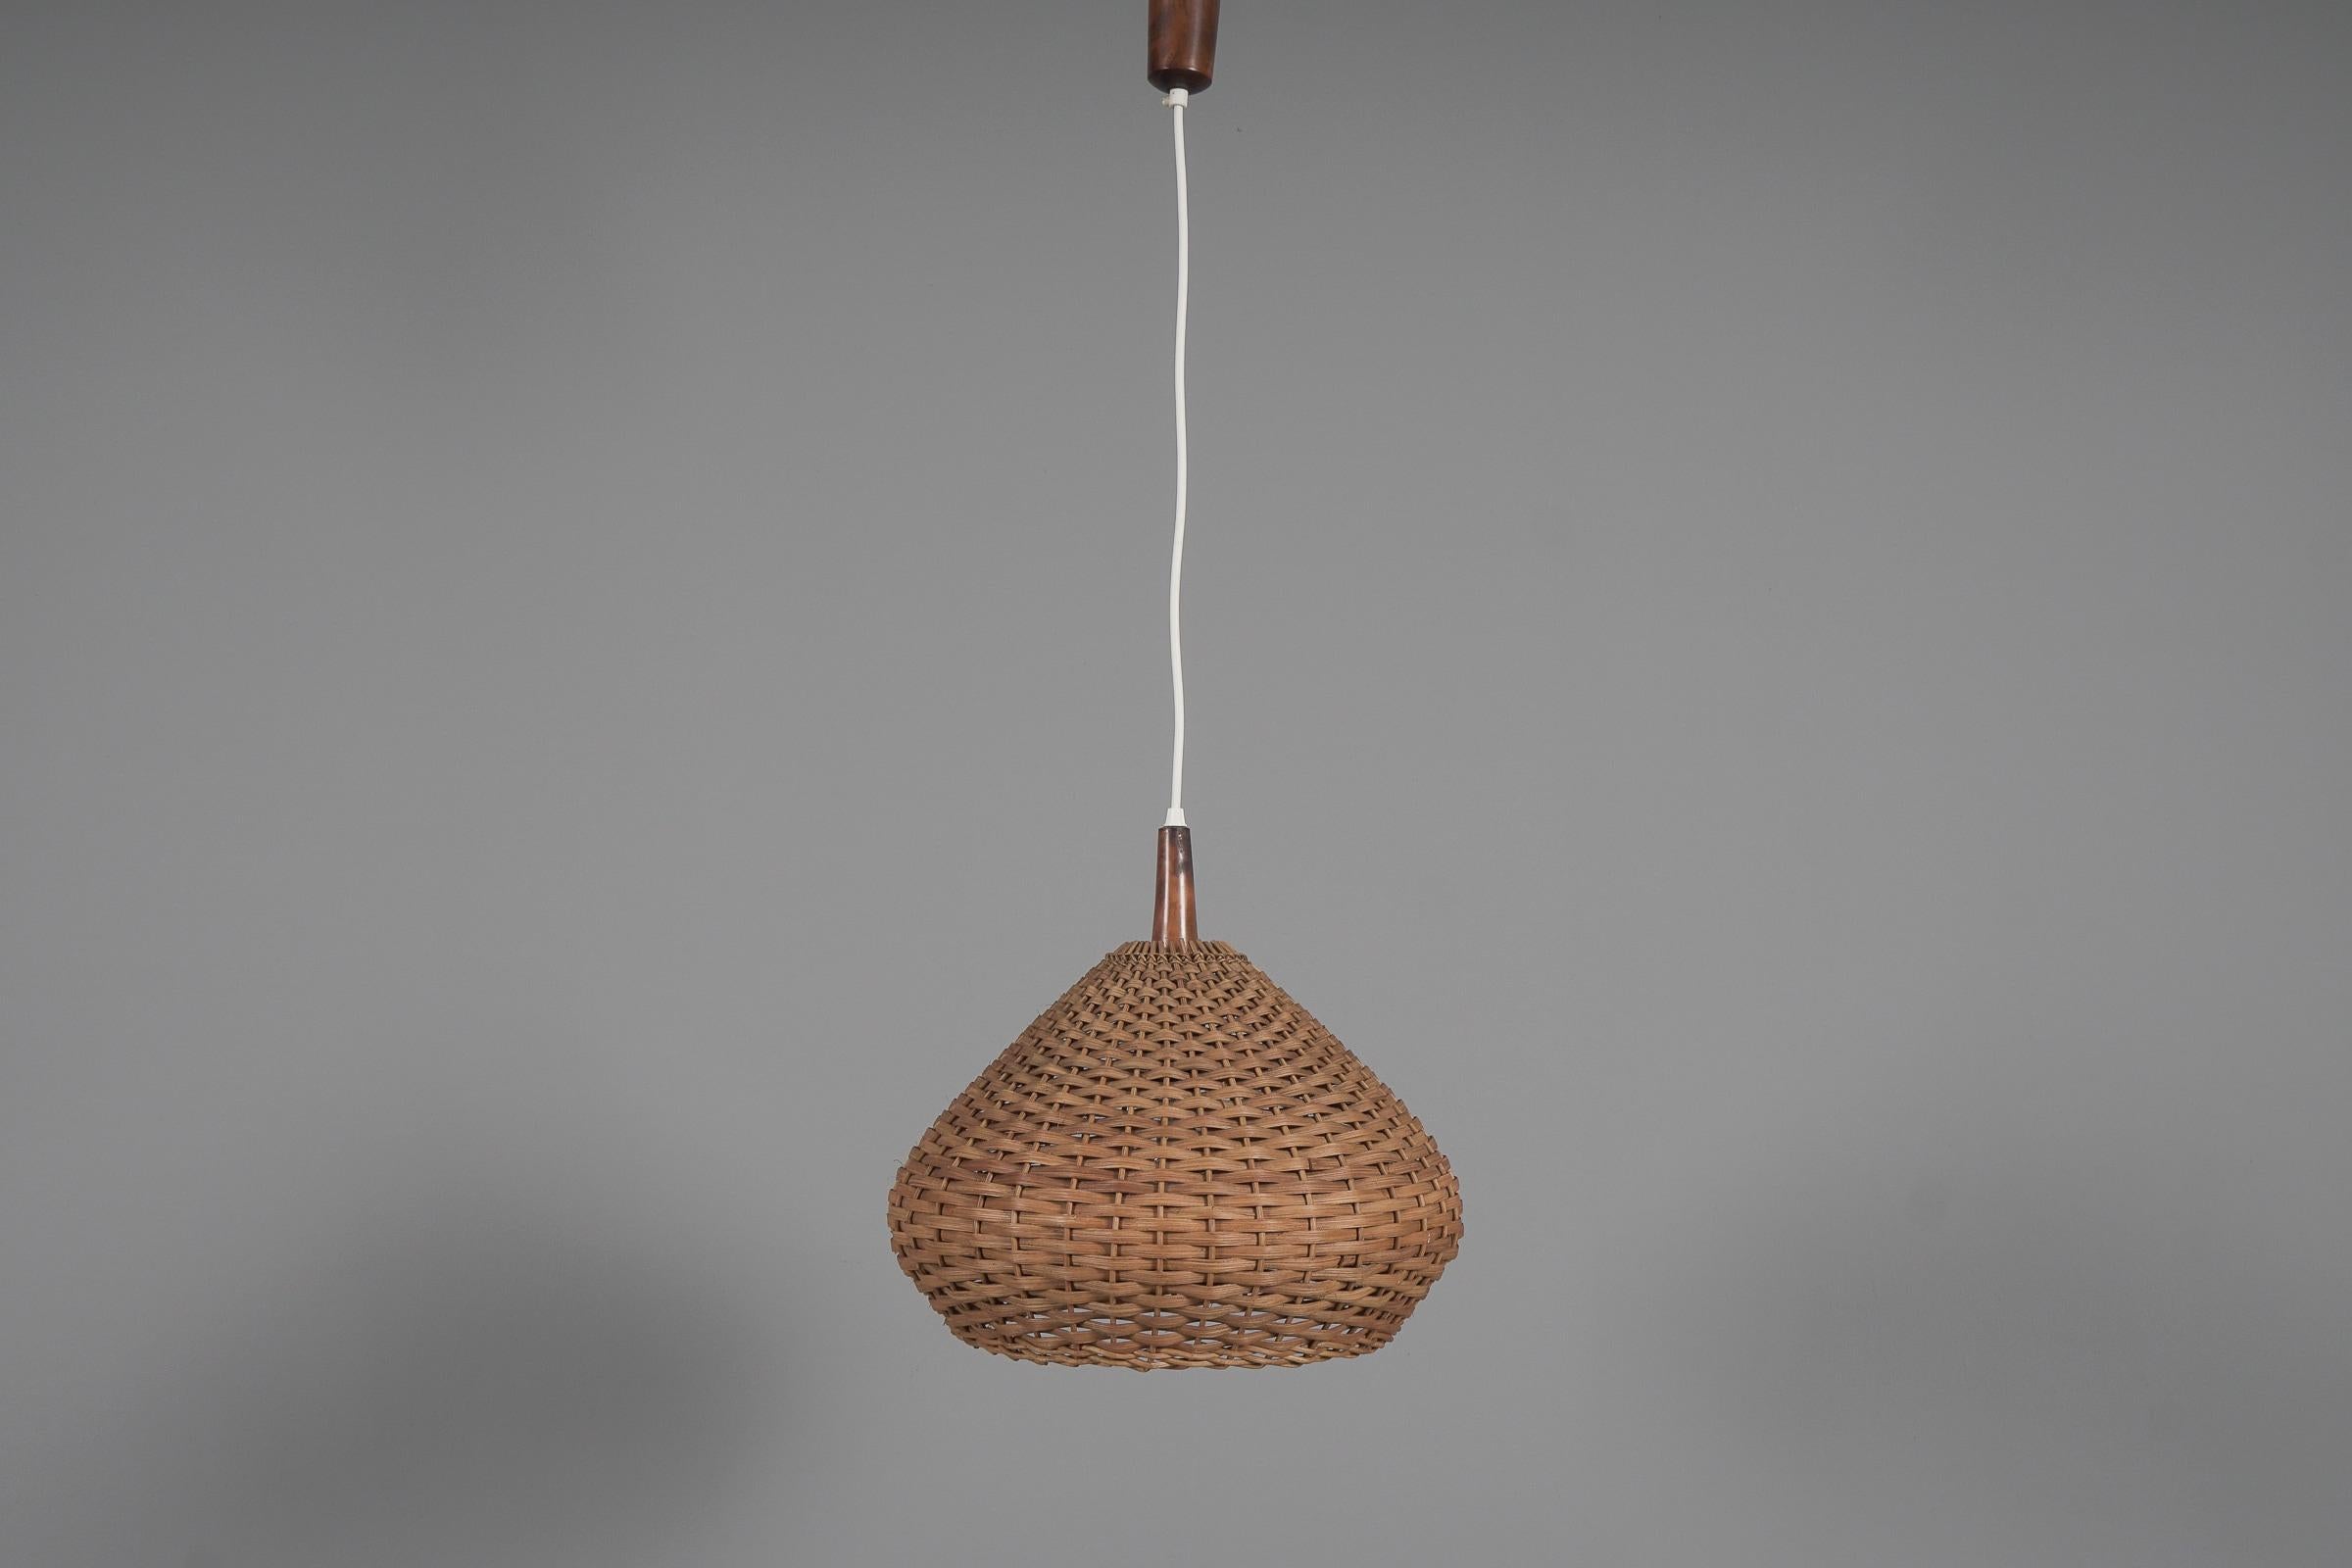 Rare and lovely decorative Mid-Century Modern pendant lamp. Designed and manufactured probably in Scandinavia, 1960s.

The lamp can be adjusted up to 50cm height.

Executed in rattan and wood, the pendant lamp comes with 1 x E27 / E26 Edison